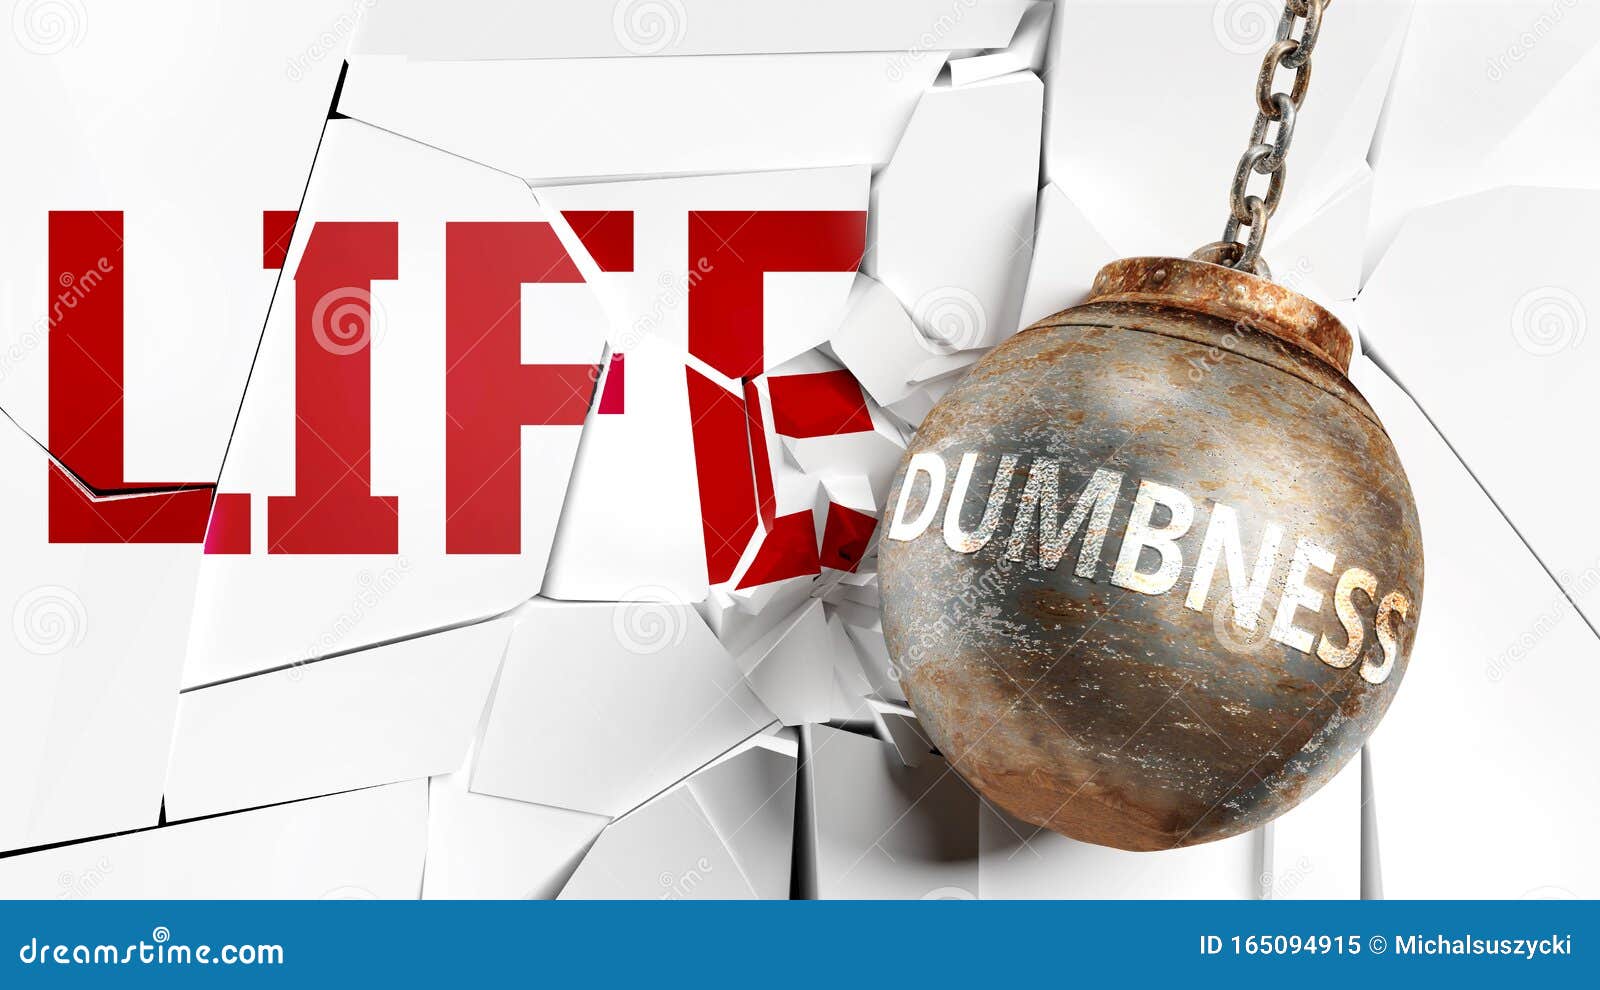 dumbness and life - pictured as a word dumbness and a wreck ball to ize that dumbness can have bad effect and can destroy